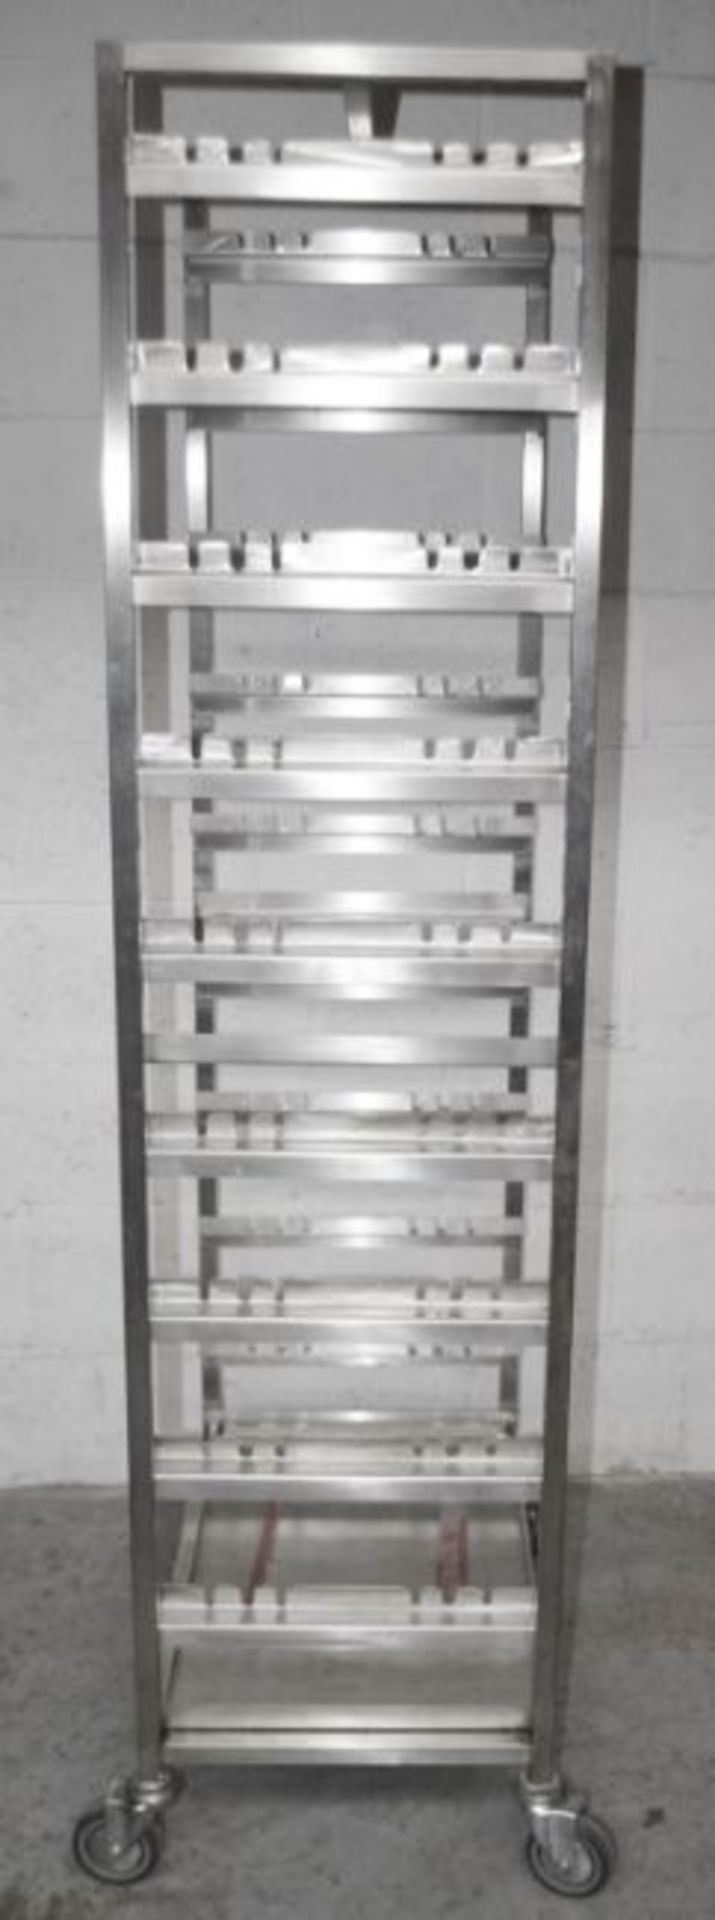 1 x Stainless Steel Commercial Kitchen 10-Grid Mobile Chicken / Meat Prep Rack - Includes Chicken - Image 2 of 3